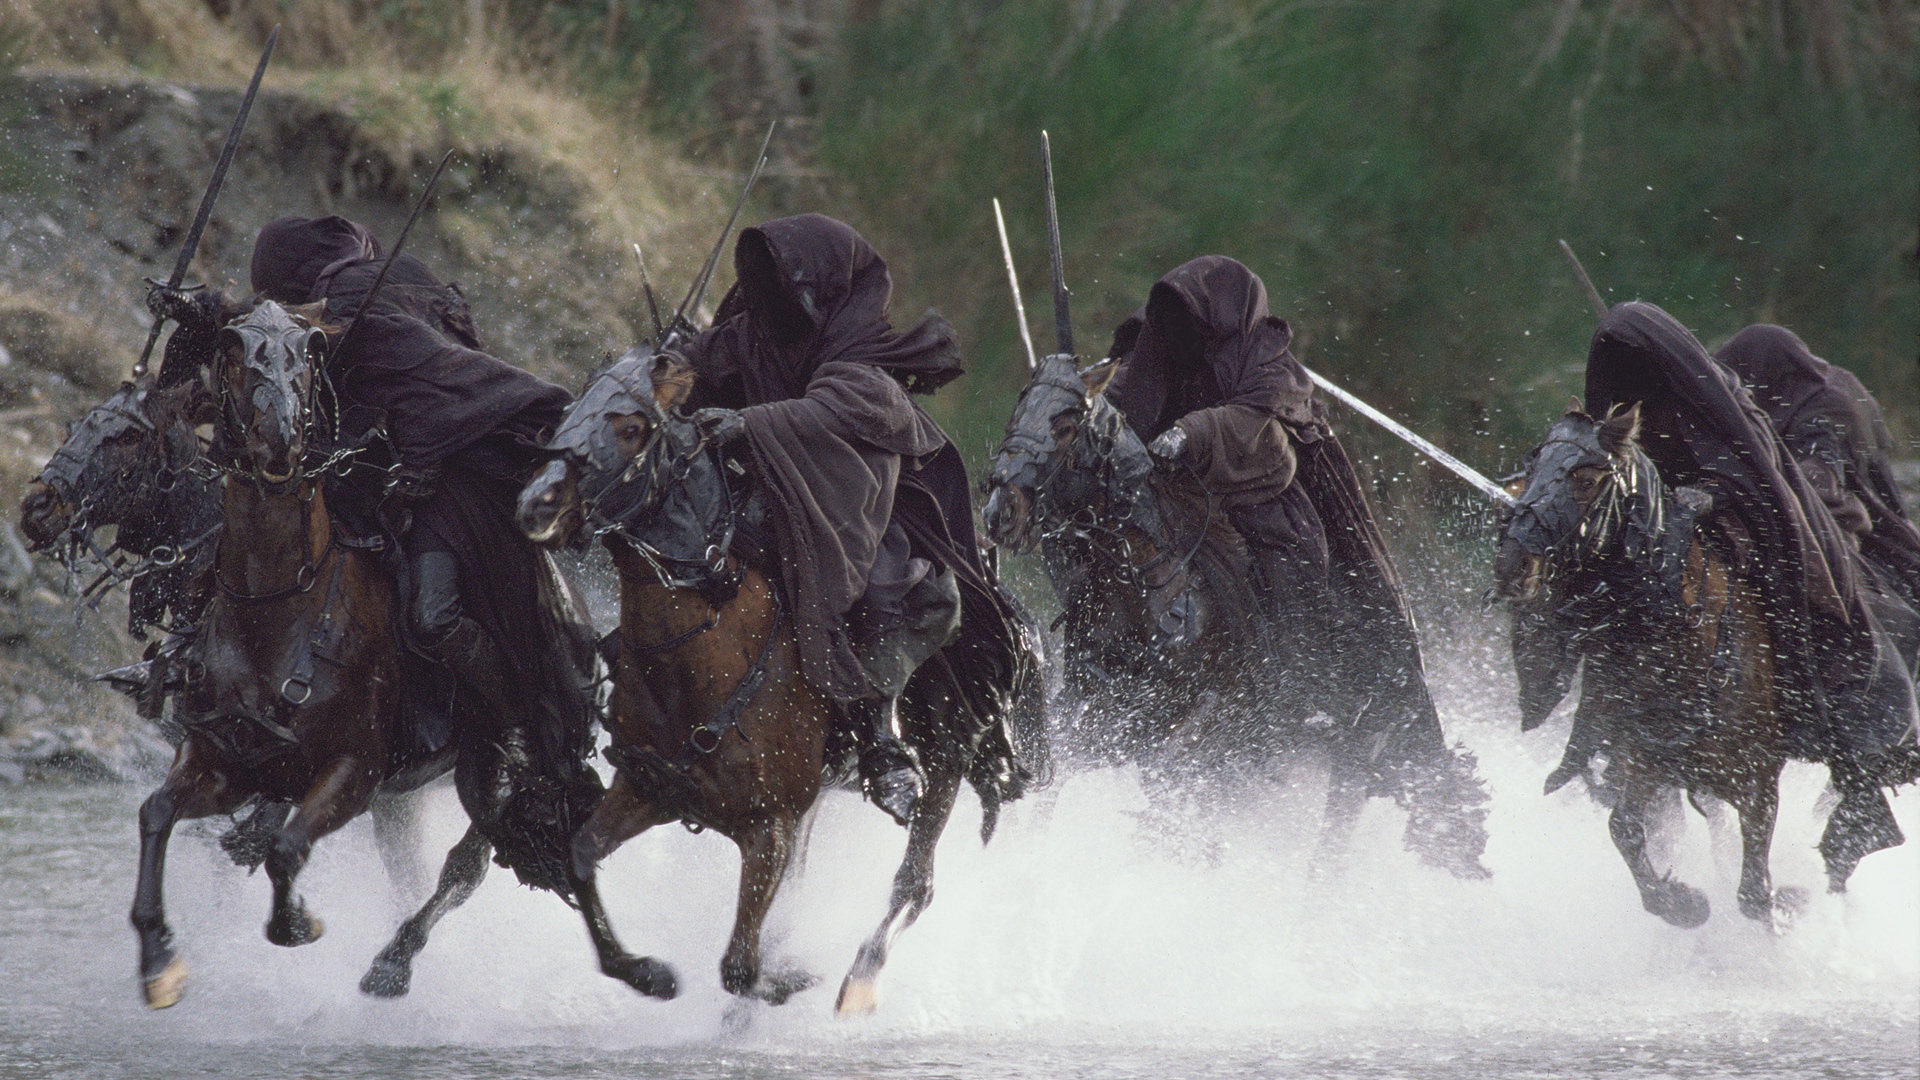 Jed Brophy and Shane Rangi in The Lord of the Rings: The Fellowship of the Ring (2001)